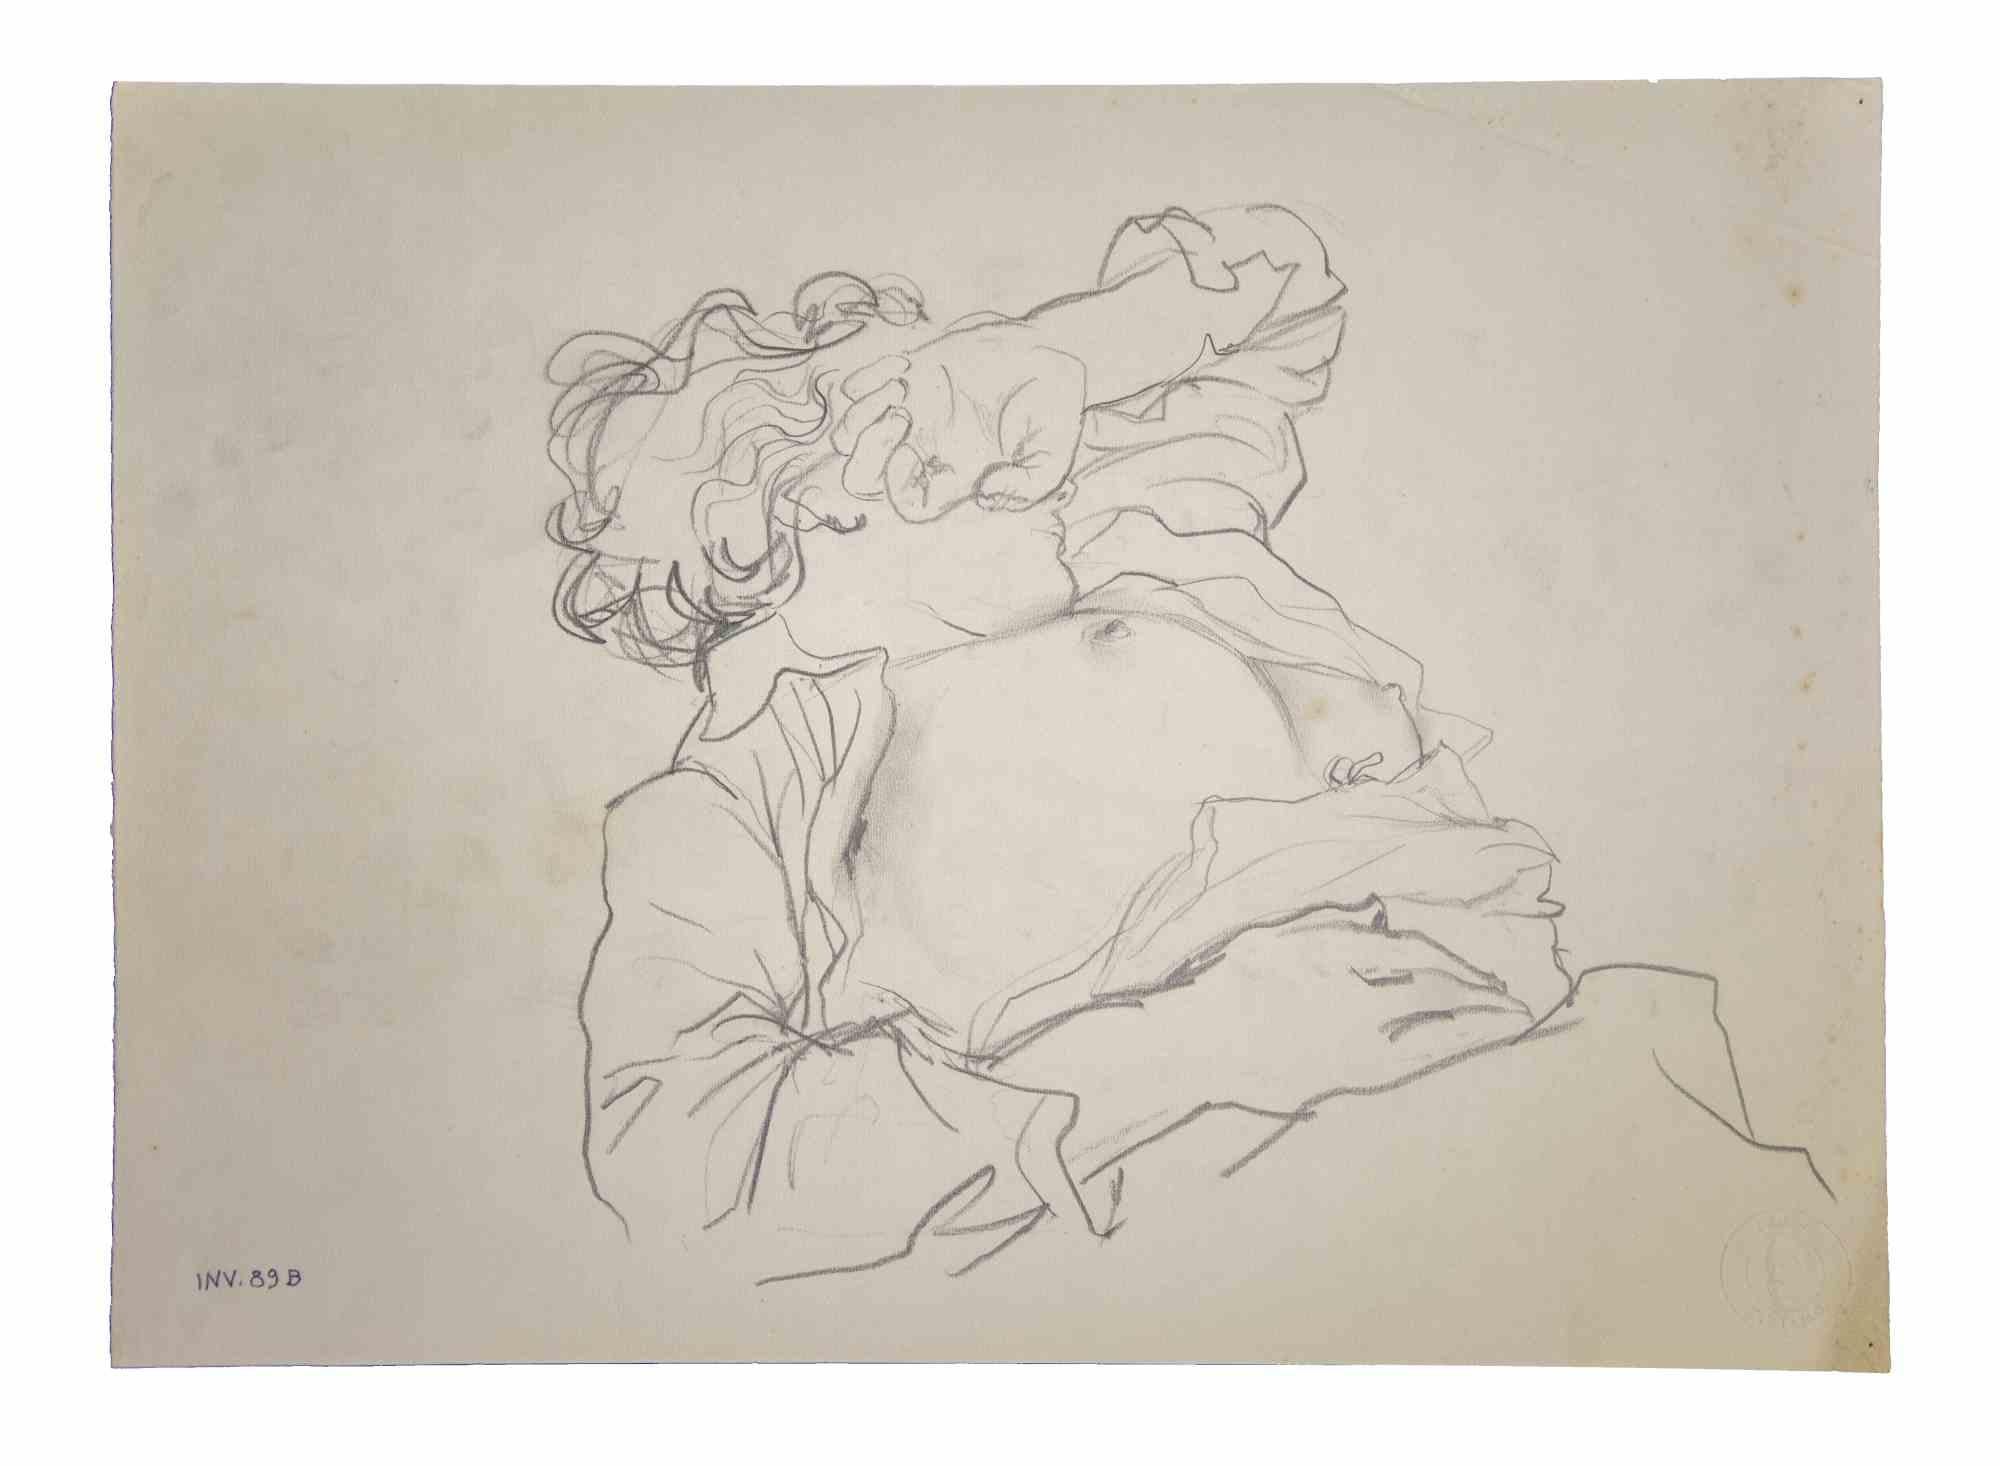 Reclined Figure is an original contemporary artwork realized in the 1970s by the Italian Contemporary artist Leo Guida  (1992 - 2017).

Original drawings in pencil on paper.

Good conditions but aged.

The artwork is depicted through strong strokes